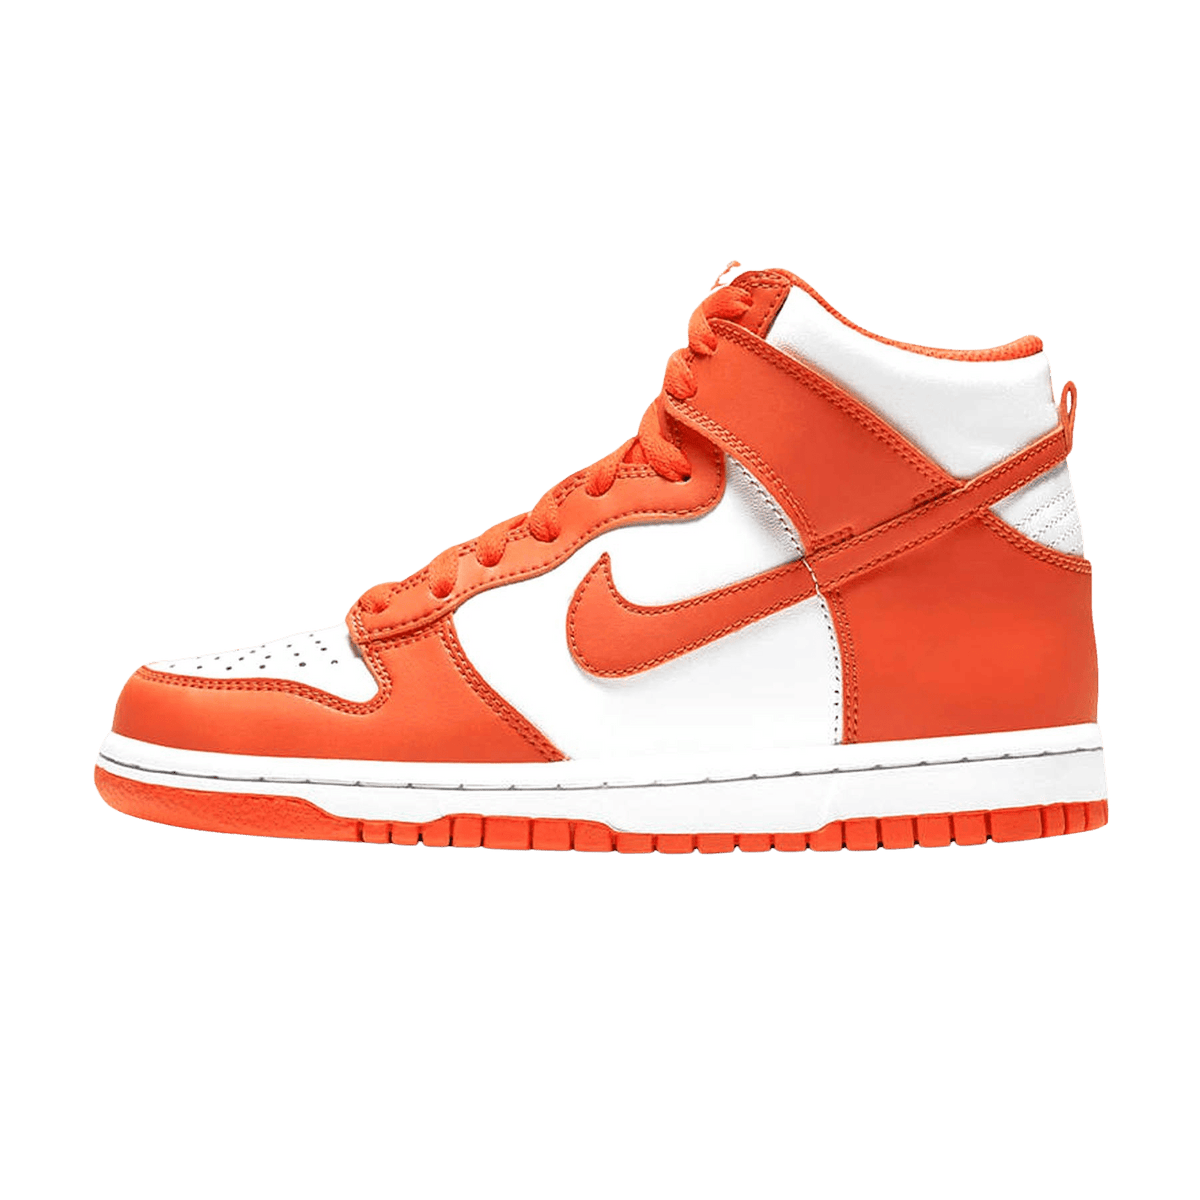 nike dunk Excee sp syracuse gs 2021 1